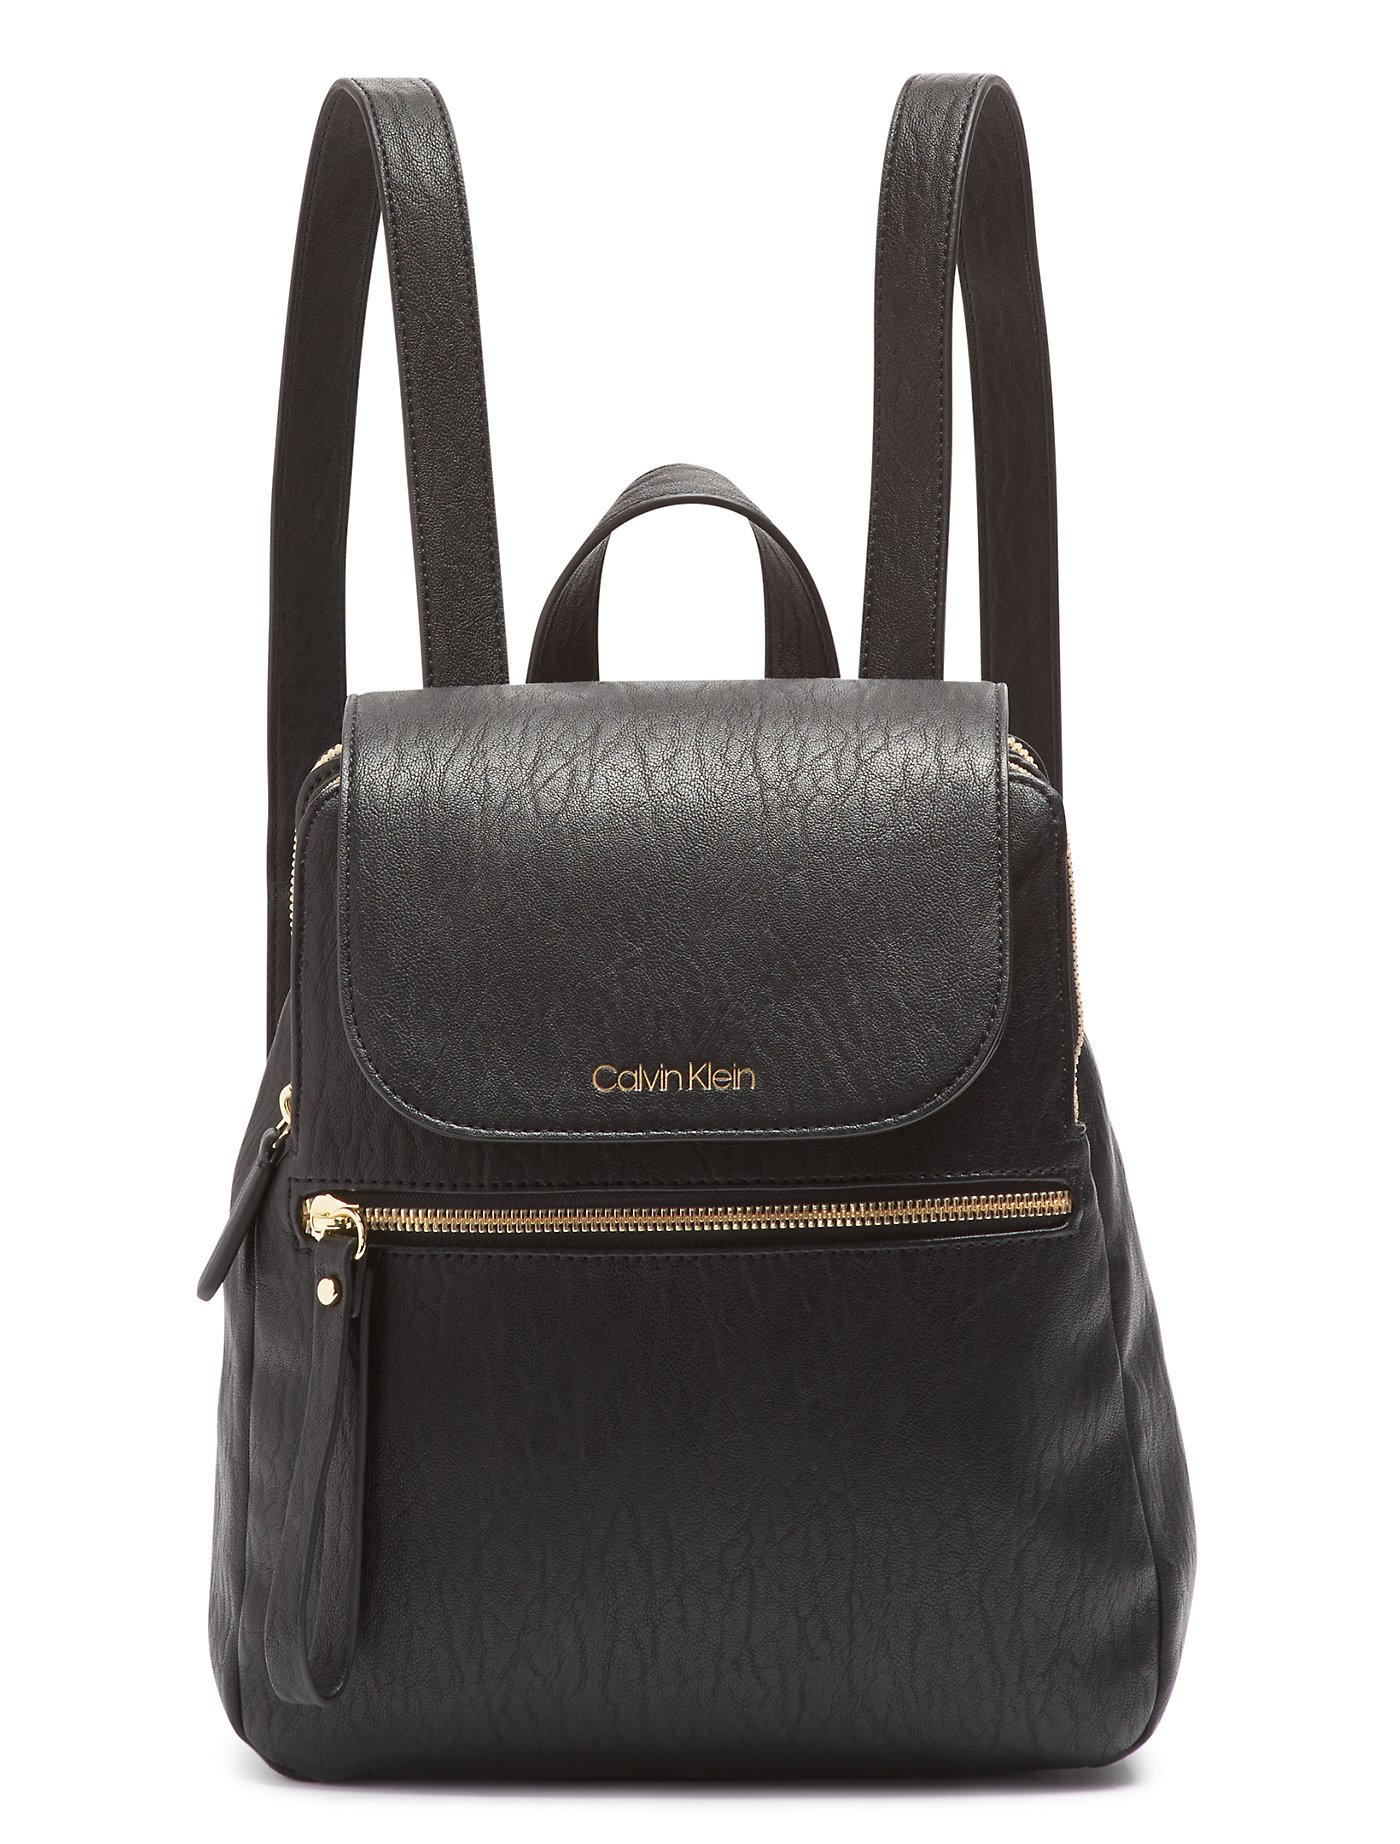 employment skip Removal Elaine Small Backpack | Calvin Klein